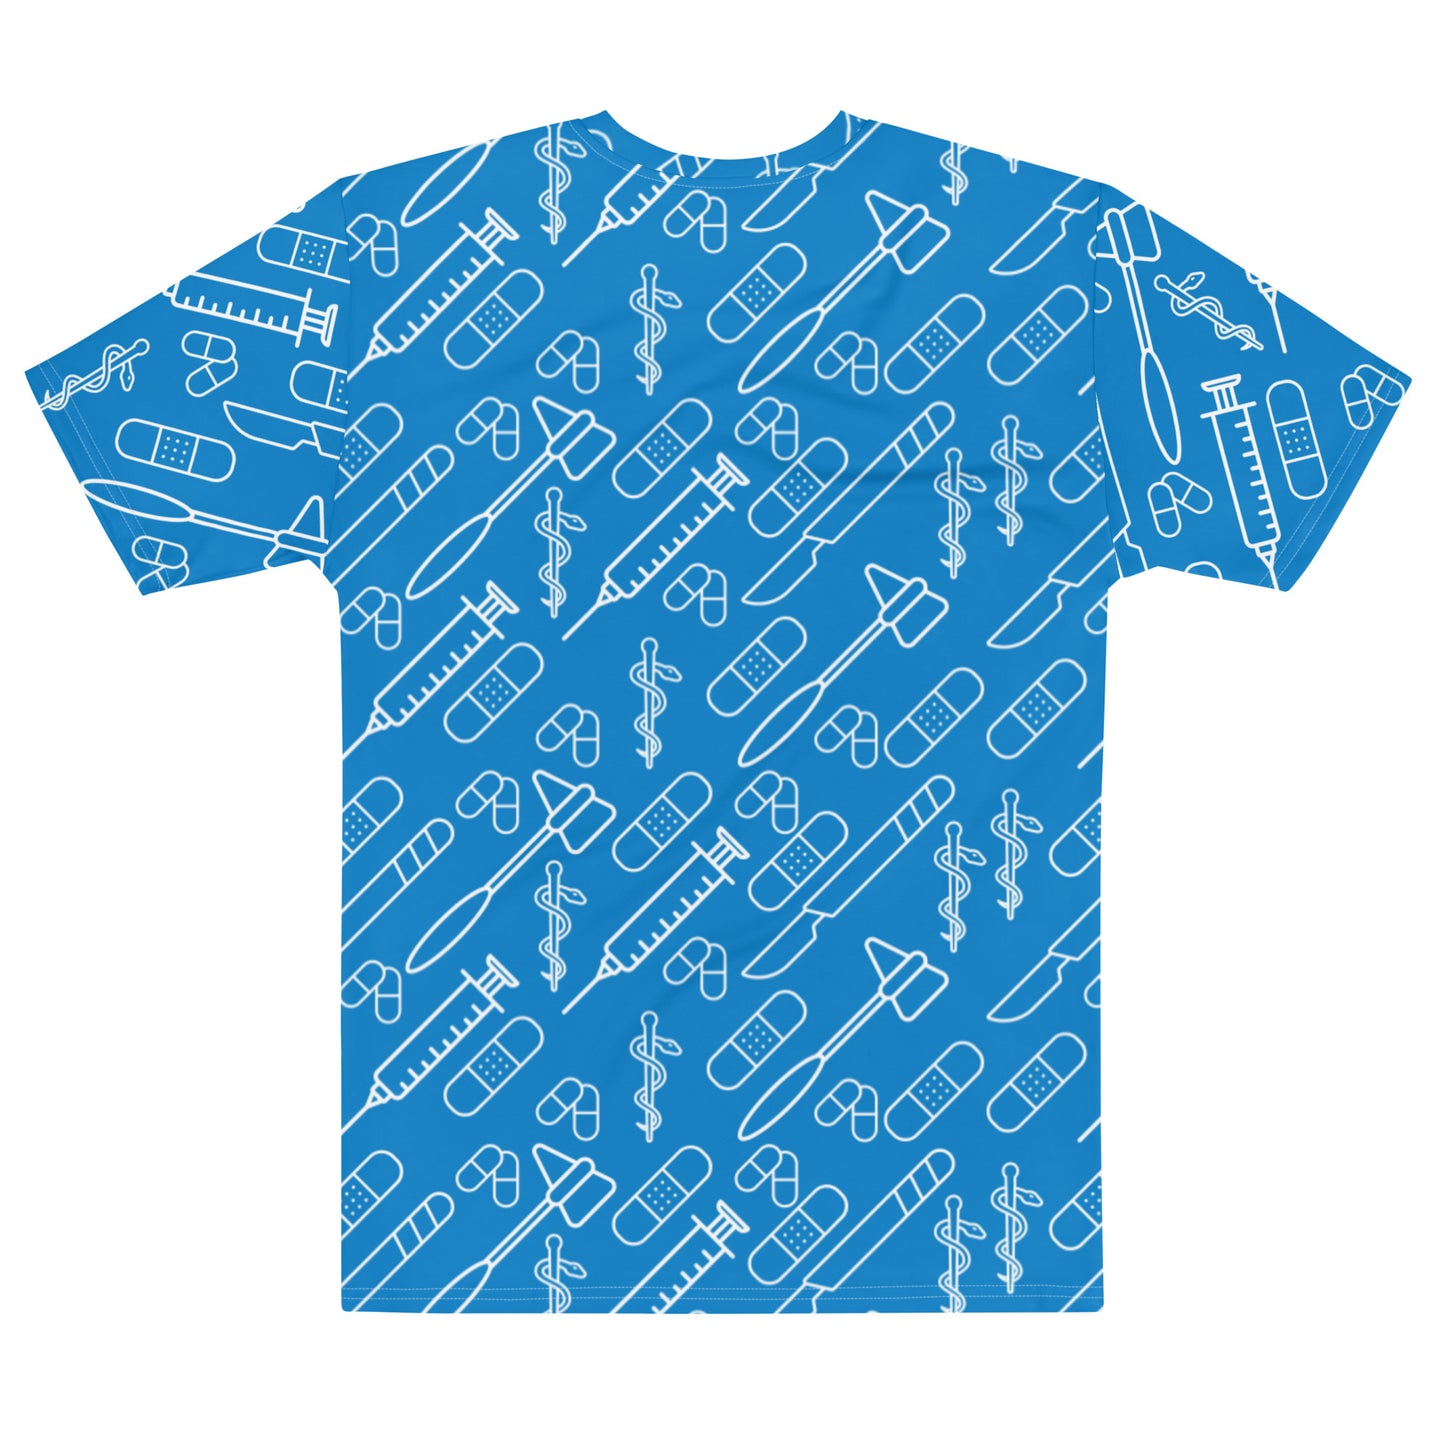 Men's All-Over Print Tee: Medical Background